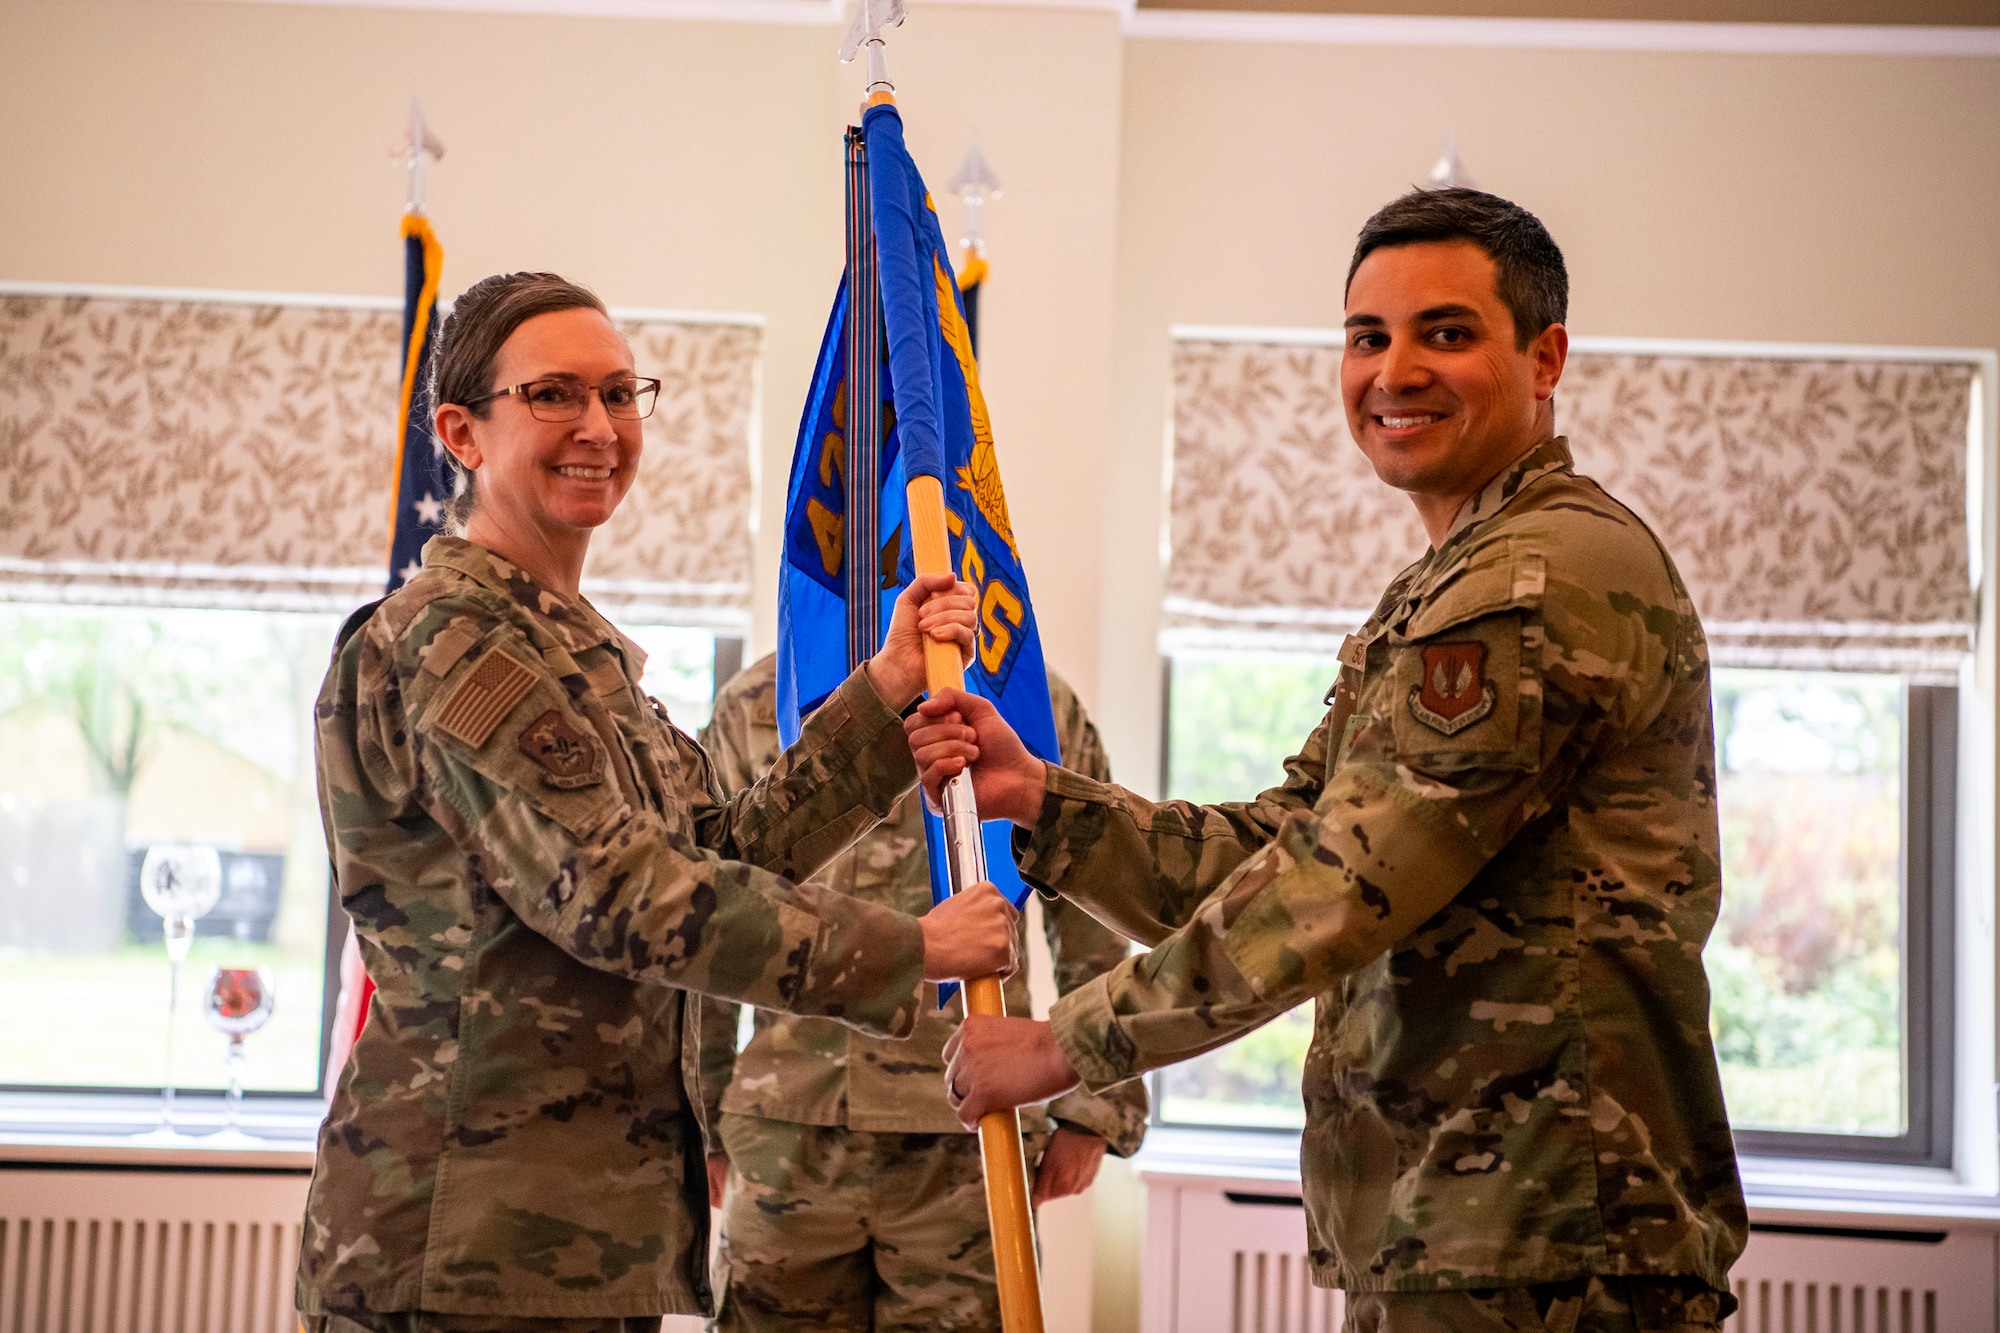 U.S. Air Force Maj. Roy Surita, right, 423d Force Support Squadron incoming commander, receives the 423d FSS guidon from Col. Valarie Long, 423d Air Base Group commander, during a change of command ceremony at RAF Alconbury, England, June 5, 2023. Prior to assuming command, Surita served as the Chief Officer of Force Development Policy at Headquarters U.S. Air Force, the Pentagon, Arlington, Virginia. (U.S. Air Force photo by Staff Sgt. Eugene Oliver)